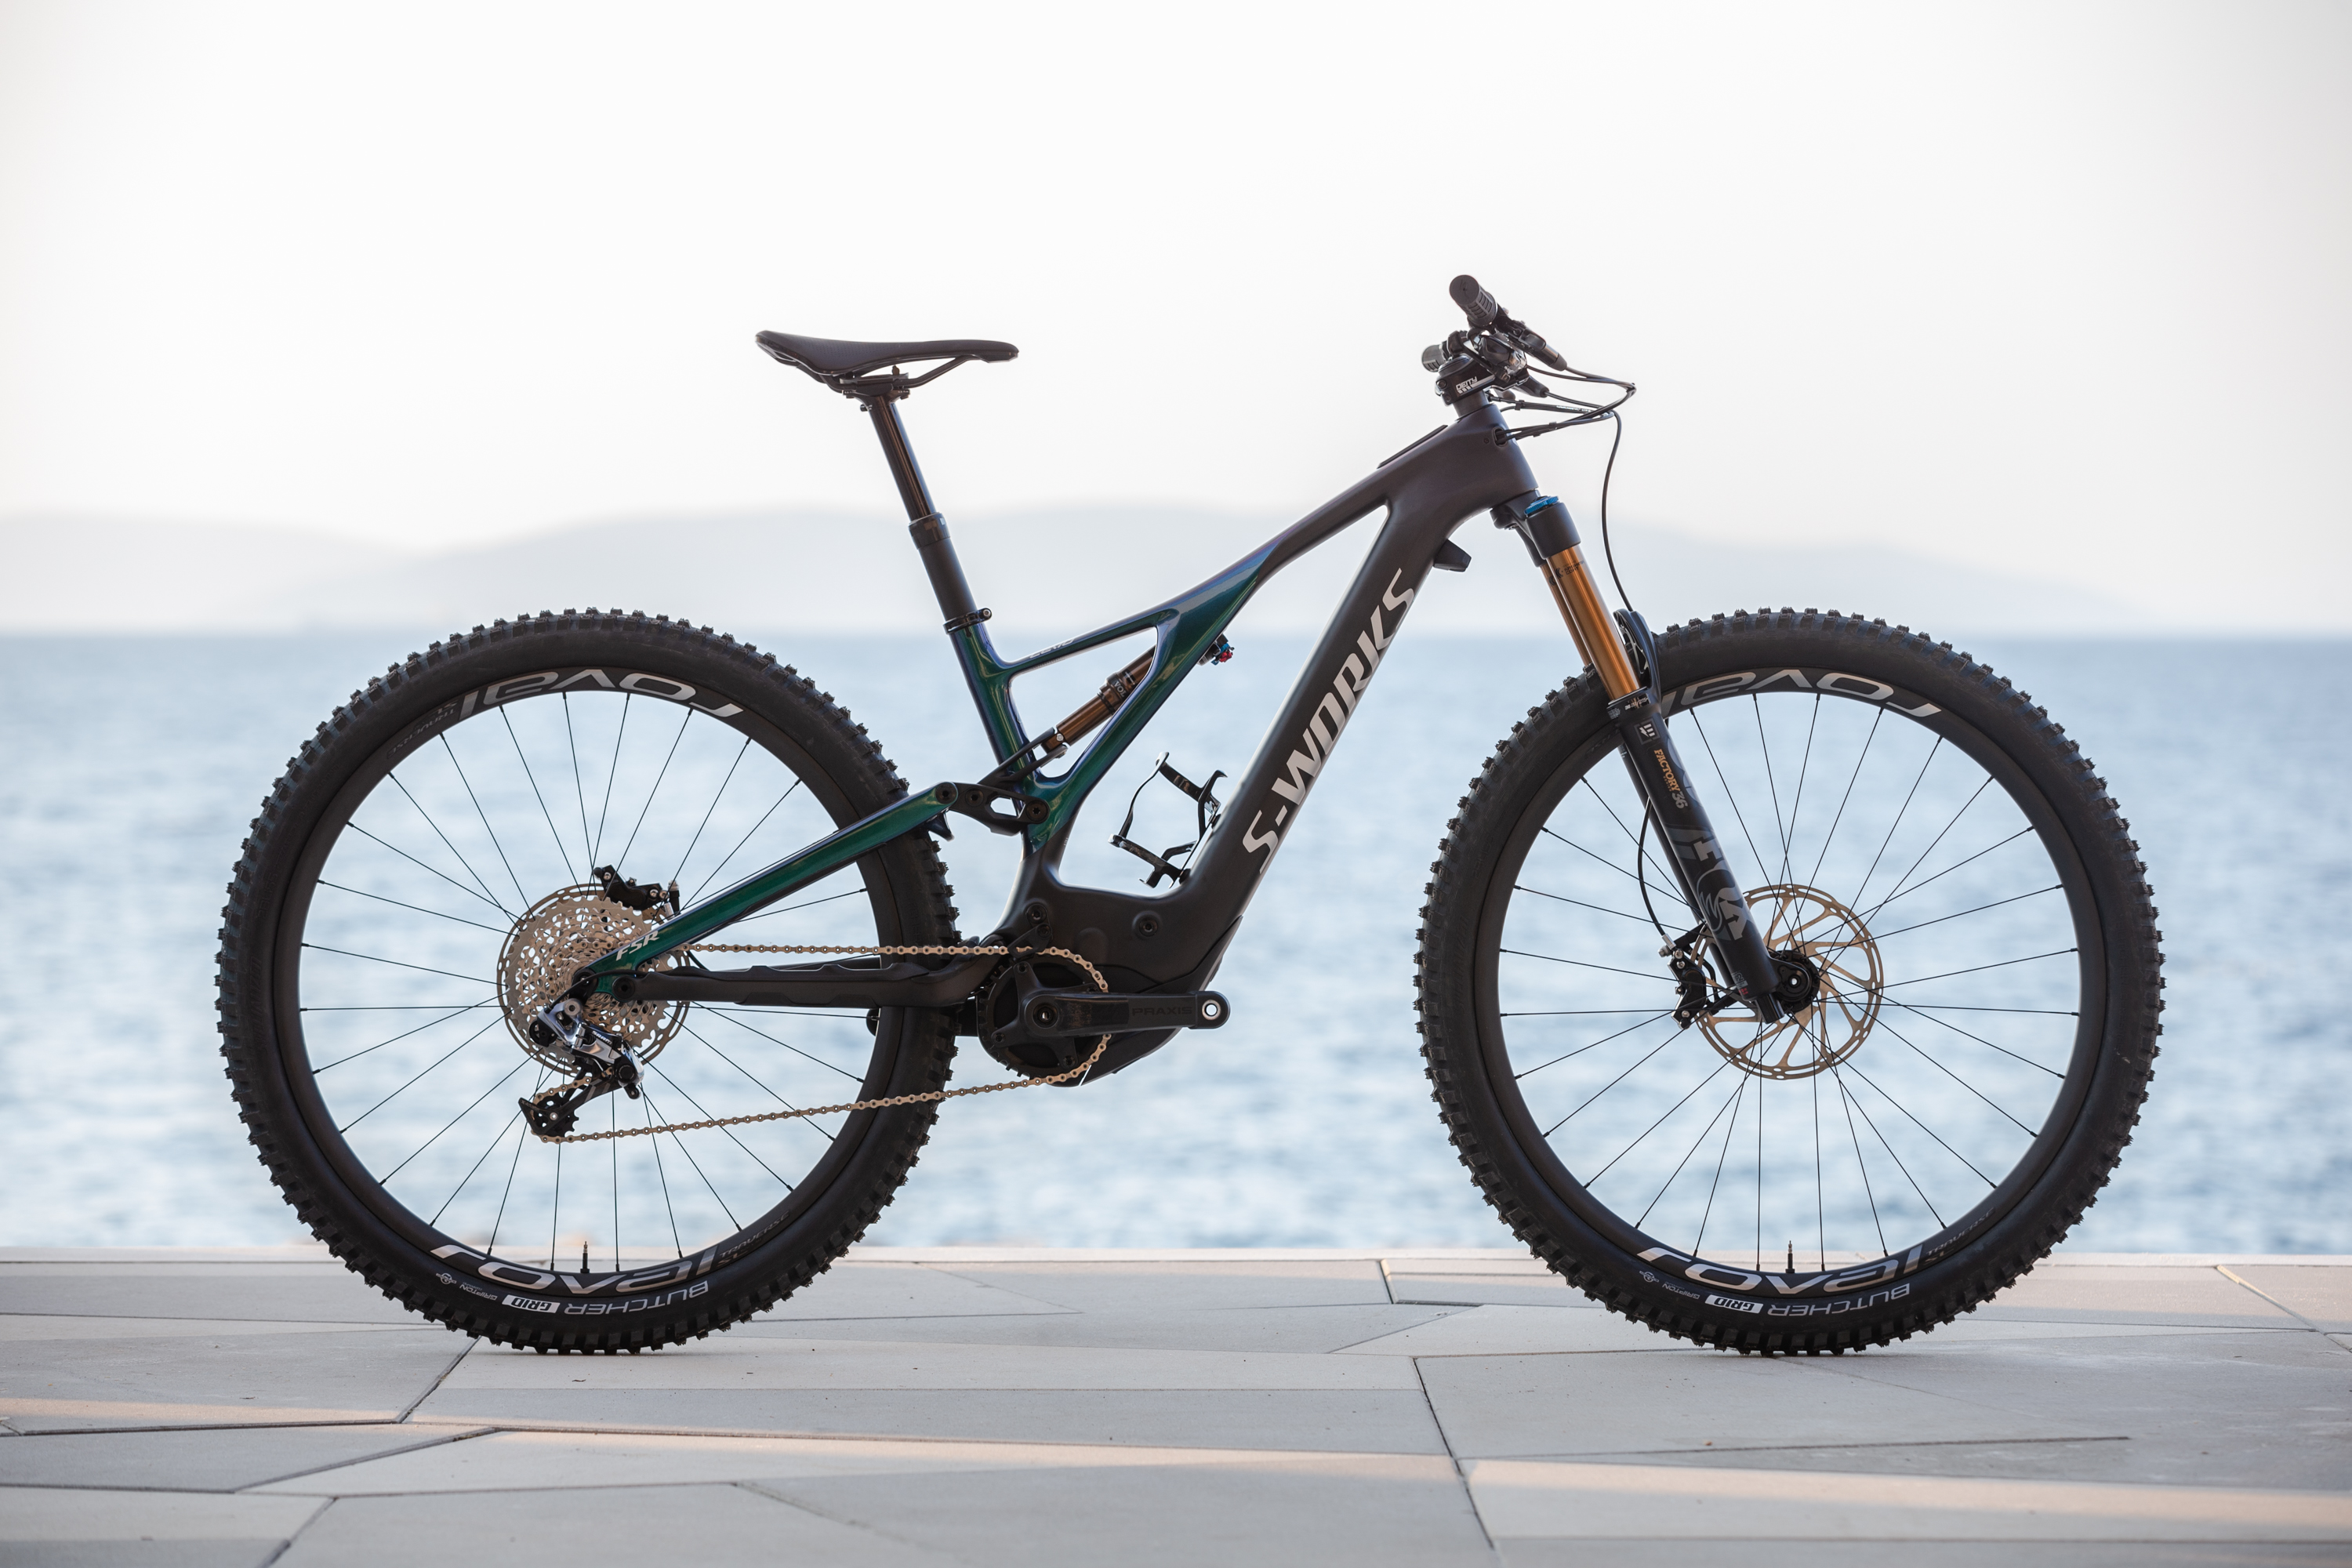 Specialized recharges Turbo Levo e-MTB w/ added range, power, less weight, more